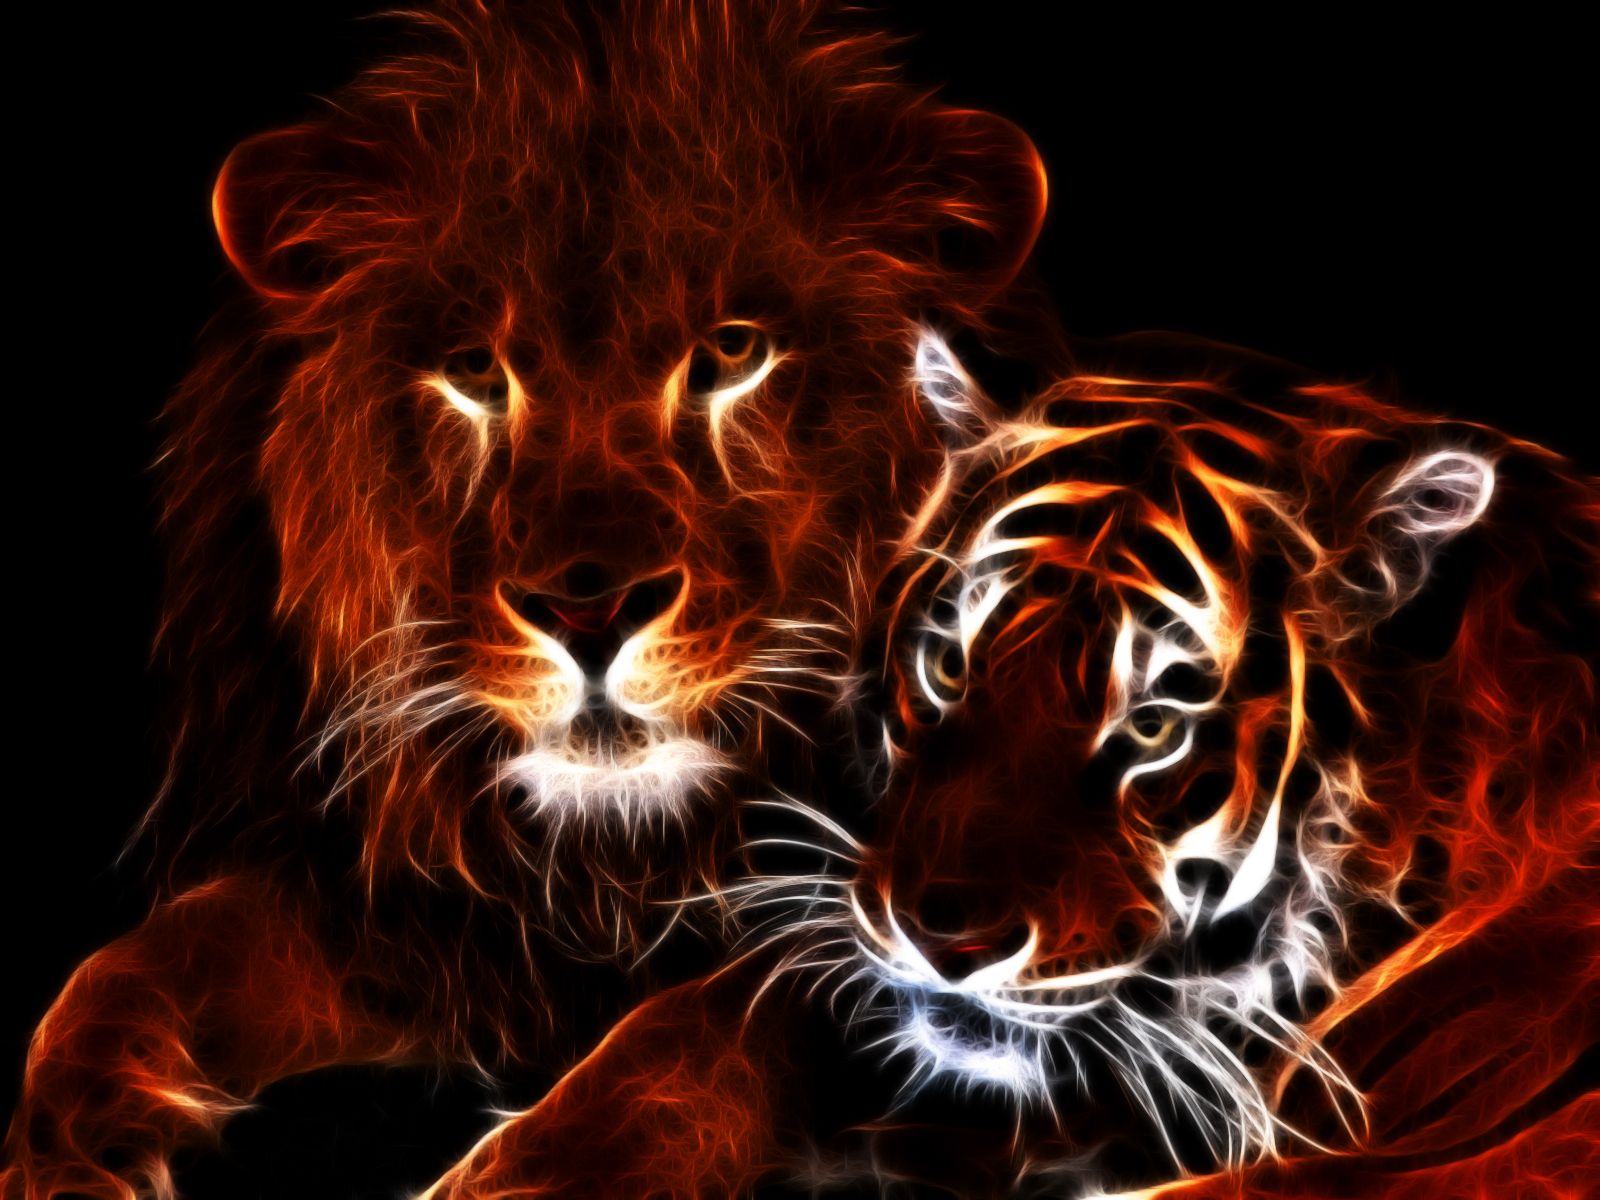 Glowing Lion and Tiger. Animals, Tiger wallpaper, Lion wallpaper